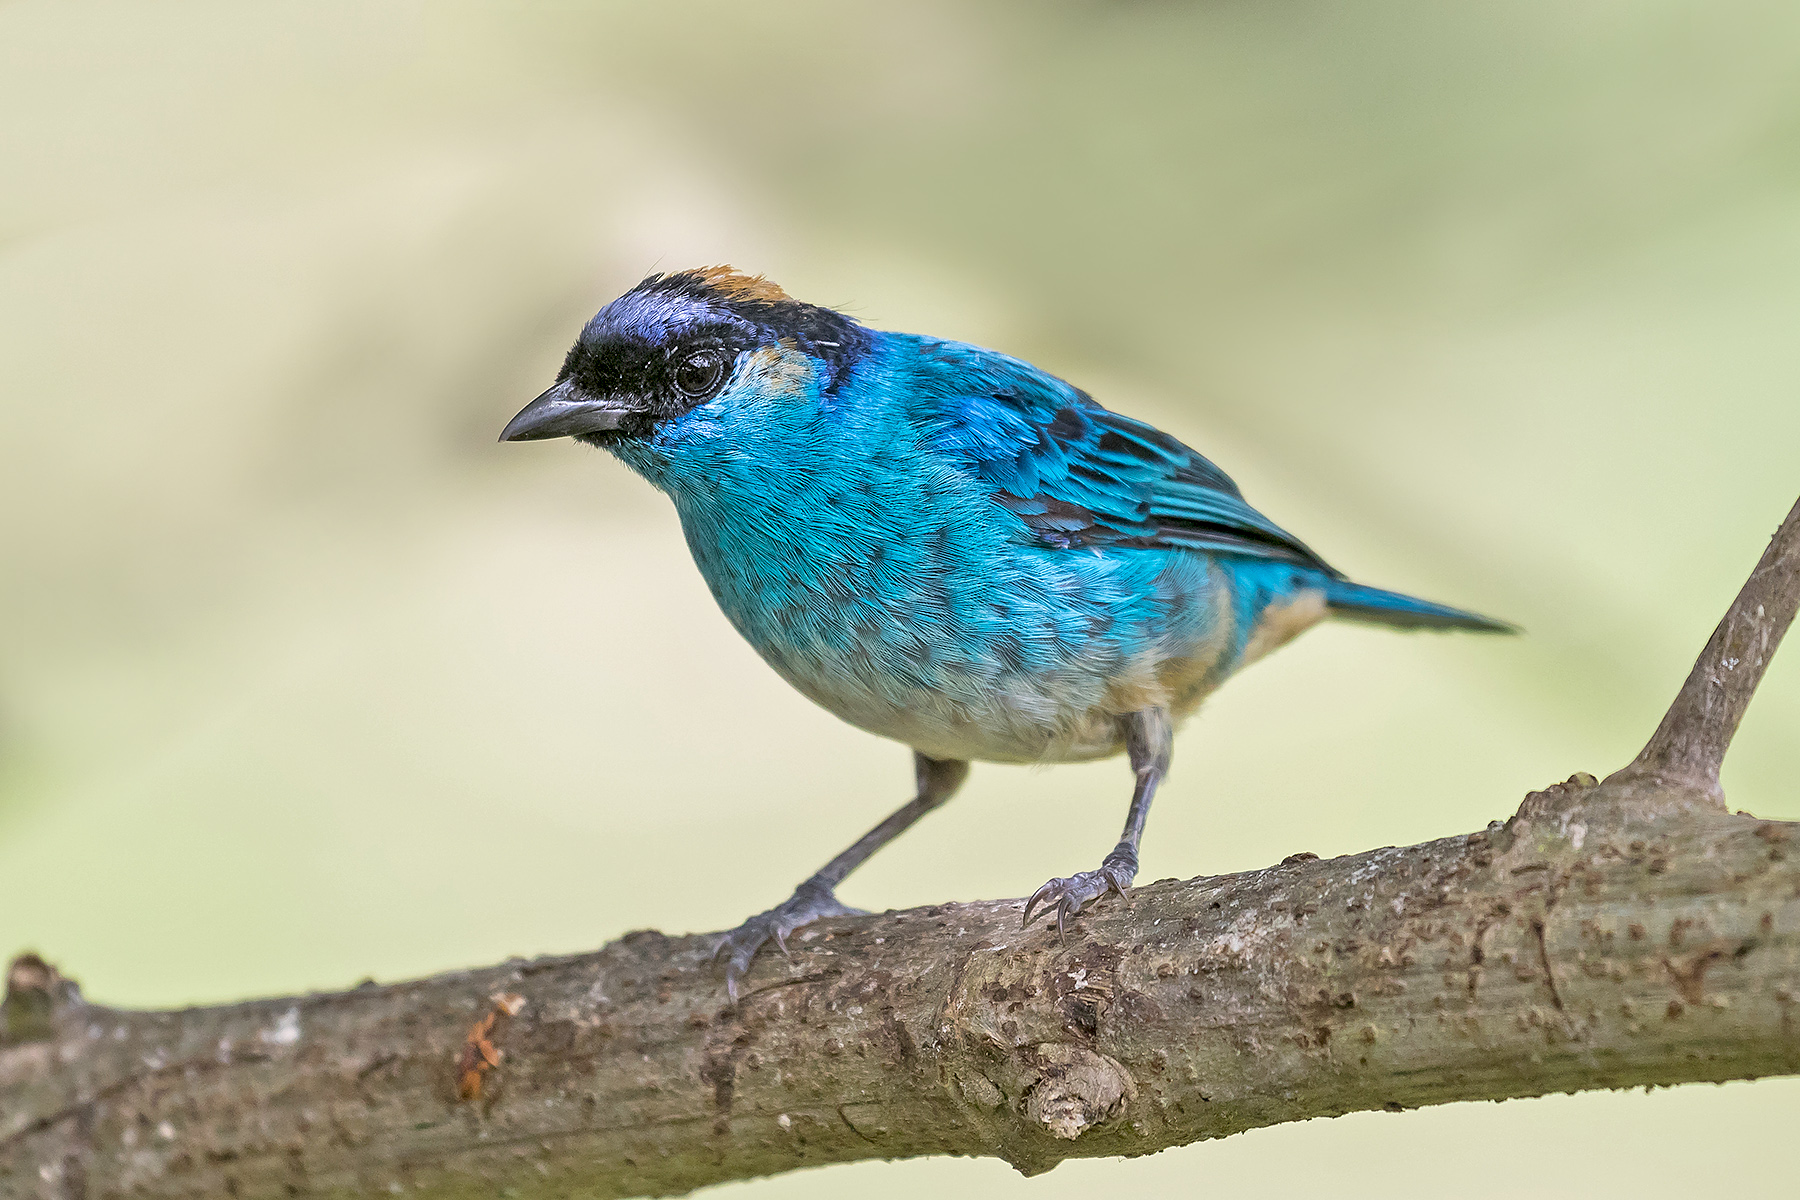 Golden-naped Tanager in Ecuador (image by Pete Morris)